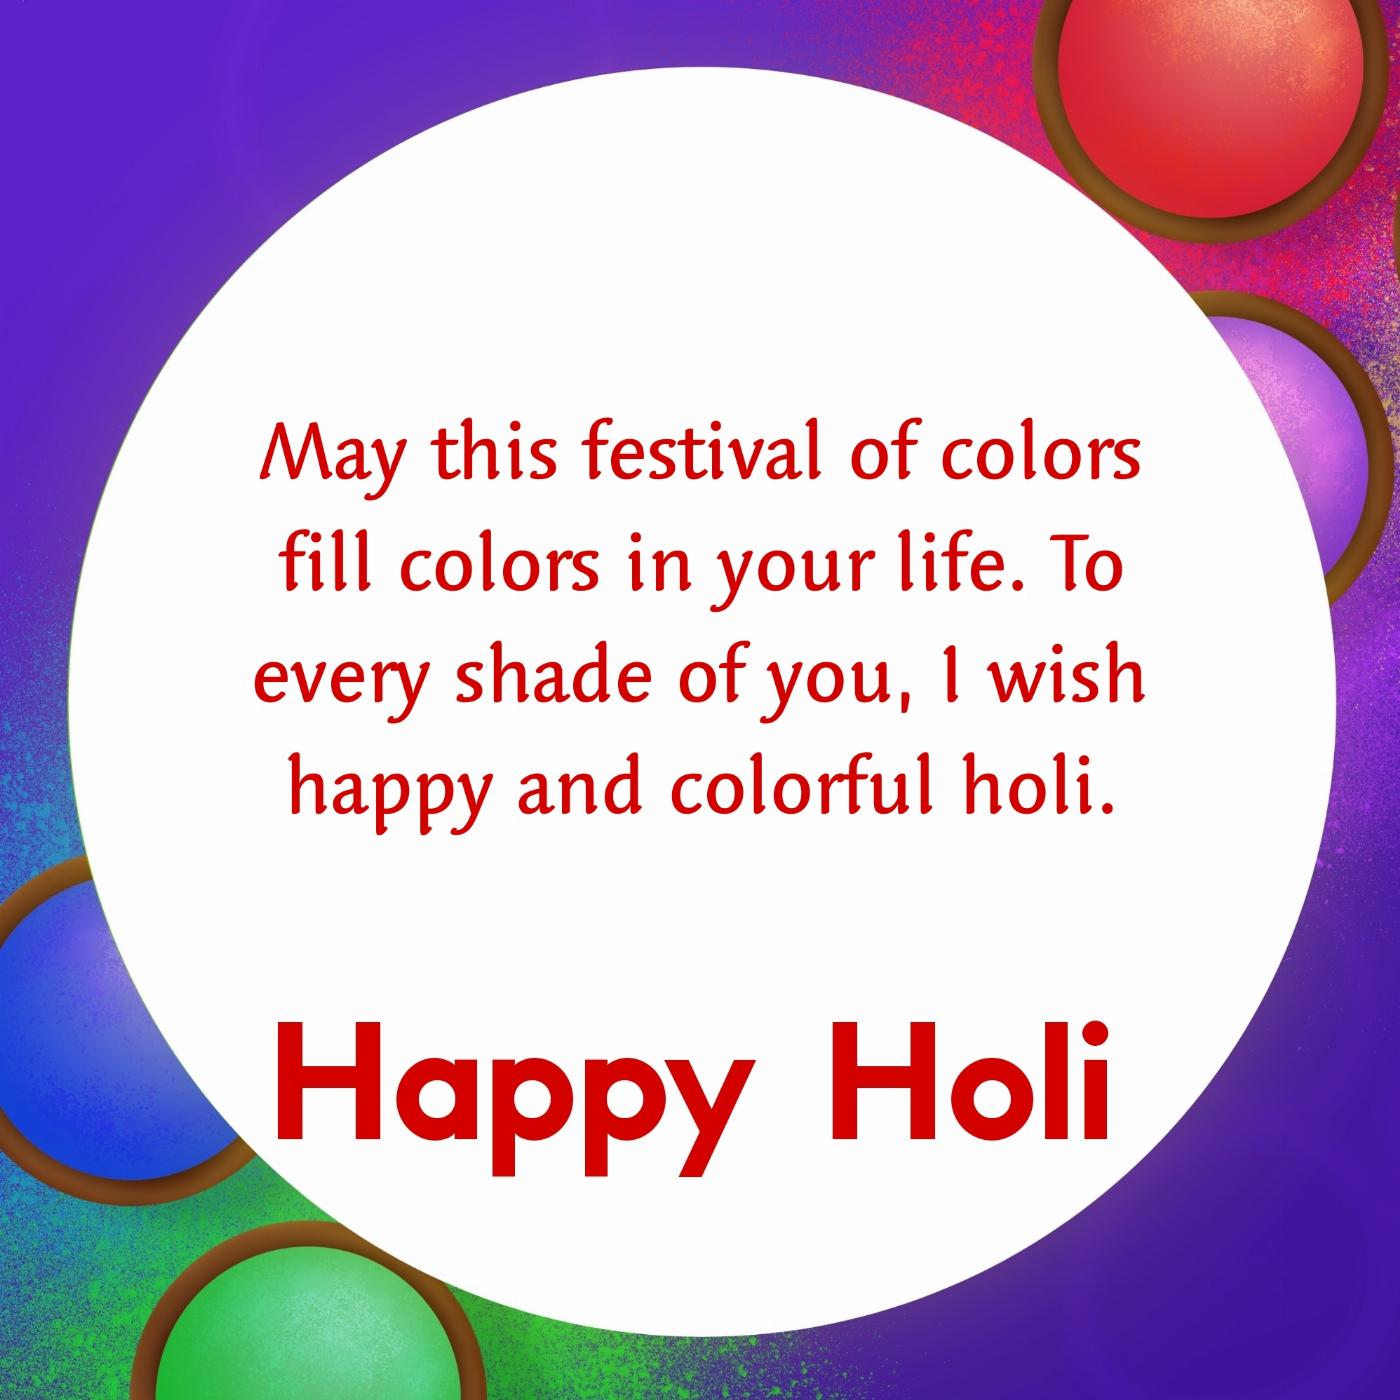 May this festival of colors fill colors in your life